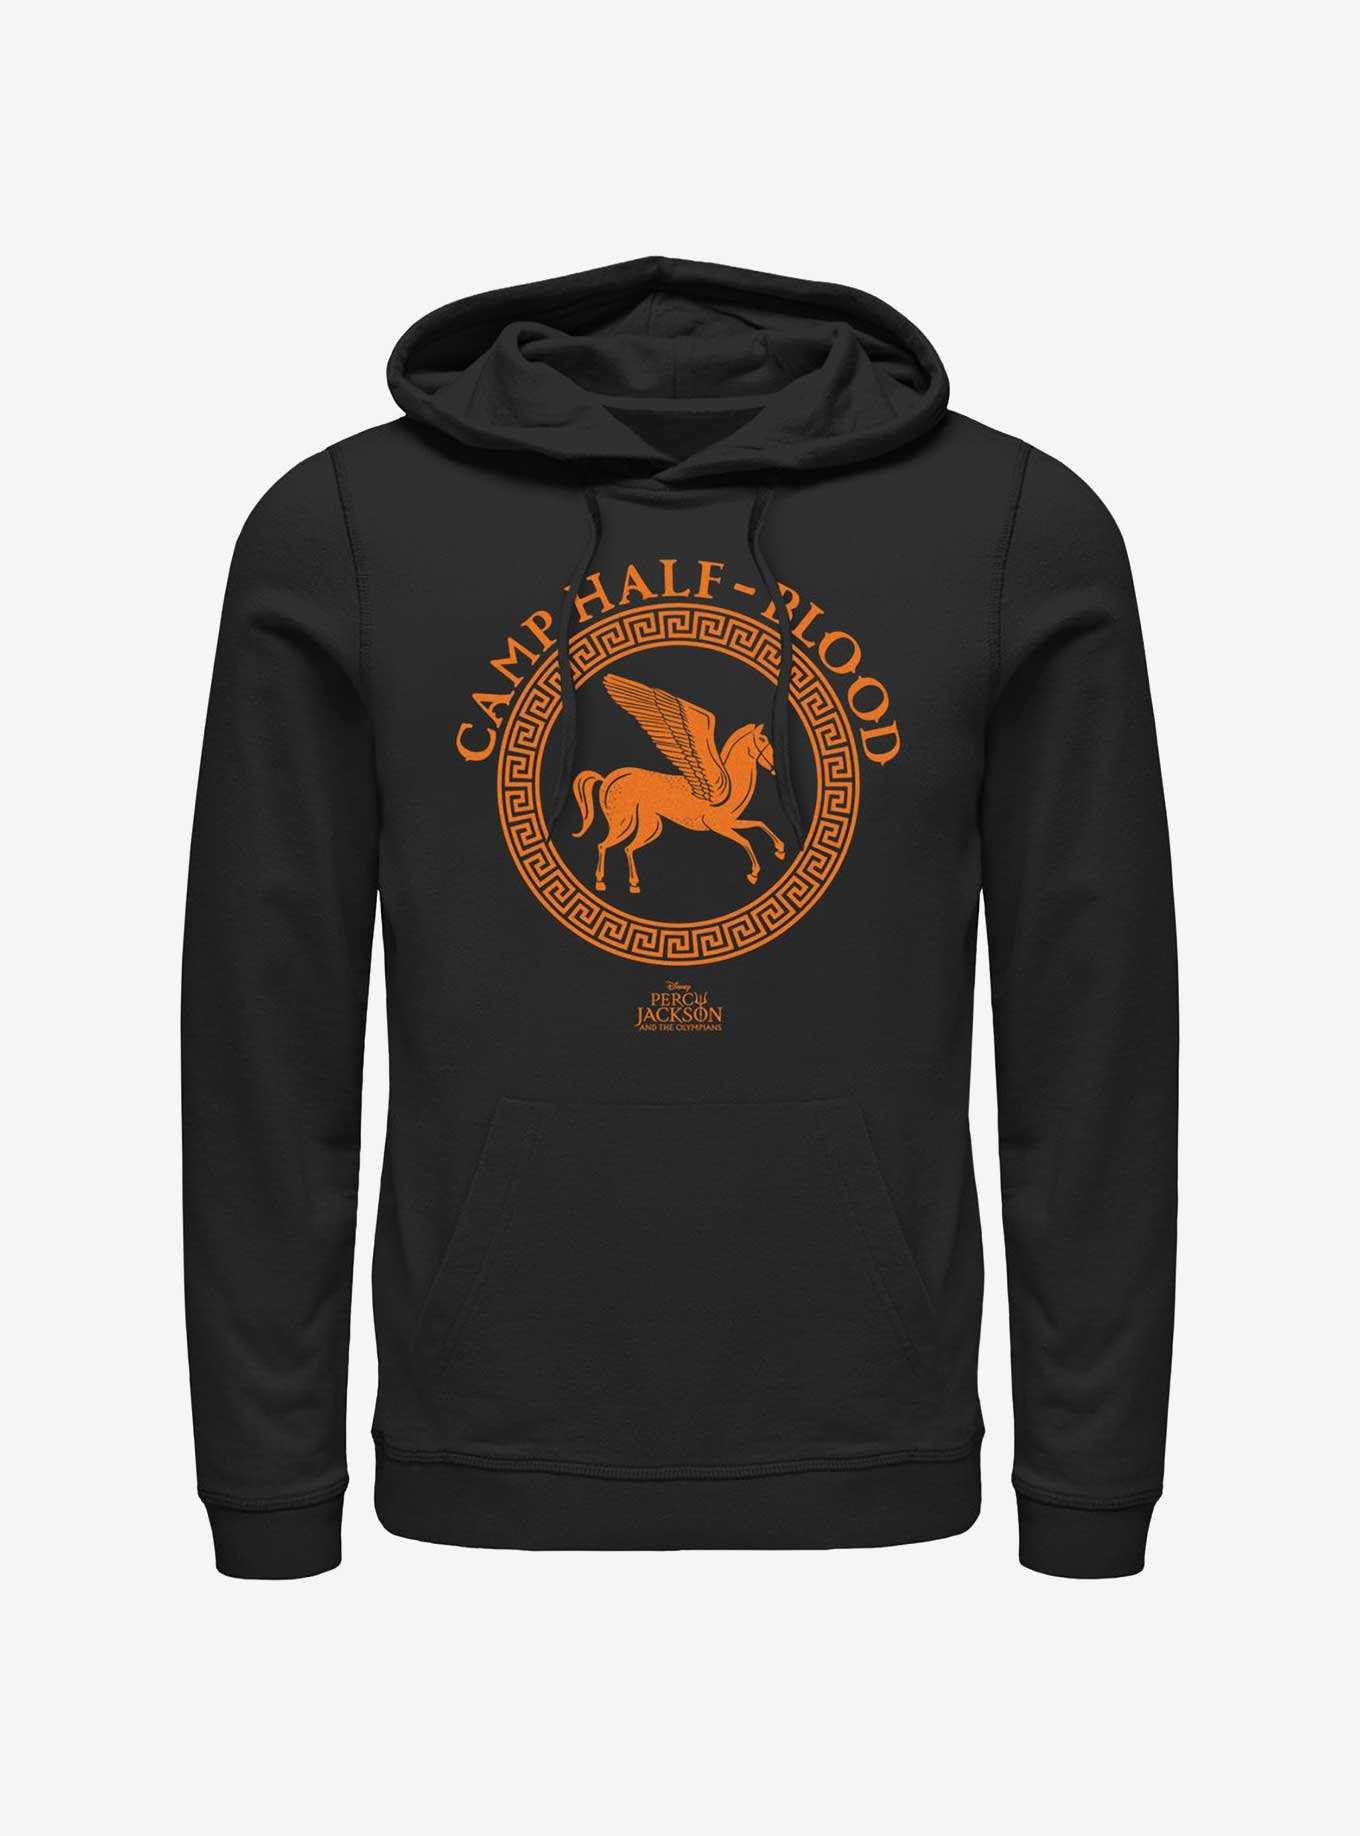 Disney Percy Jackson And The Olympians Camp Half Blood Icon Logo Hoodie, , hi-res